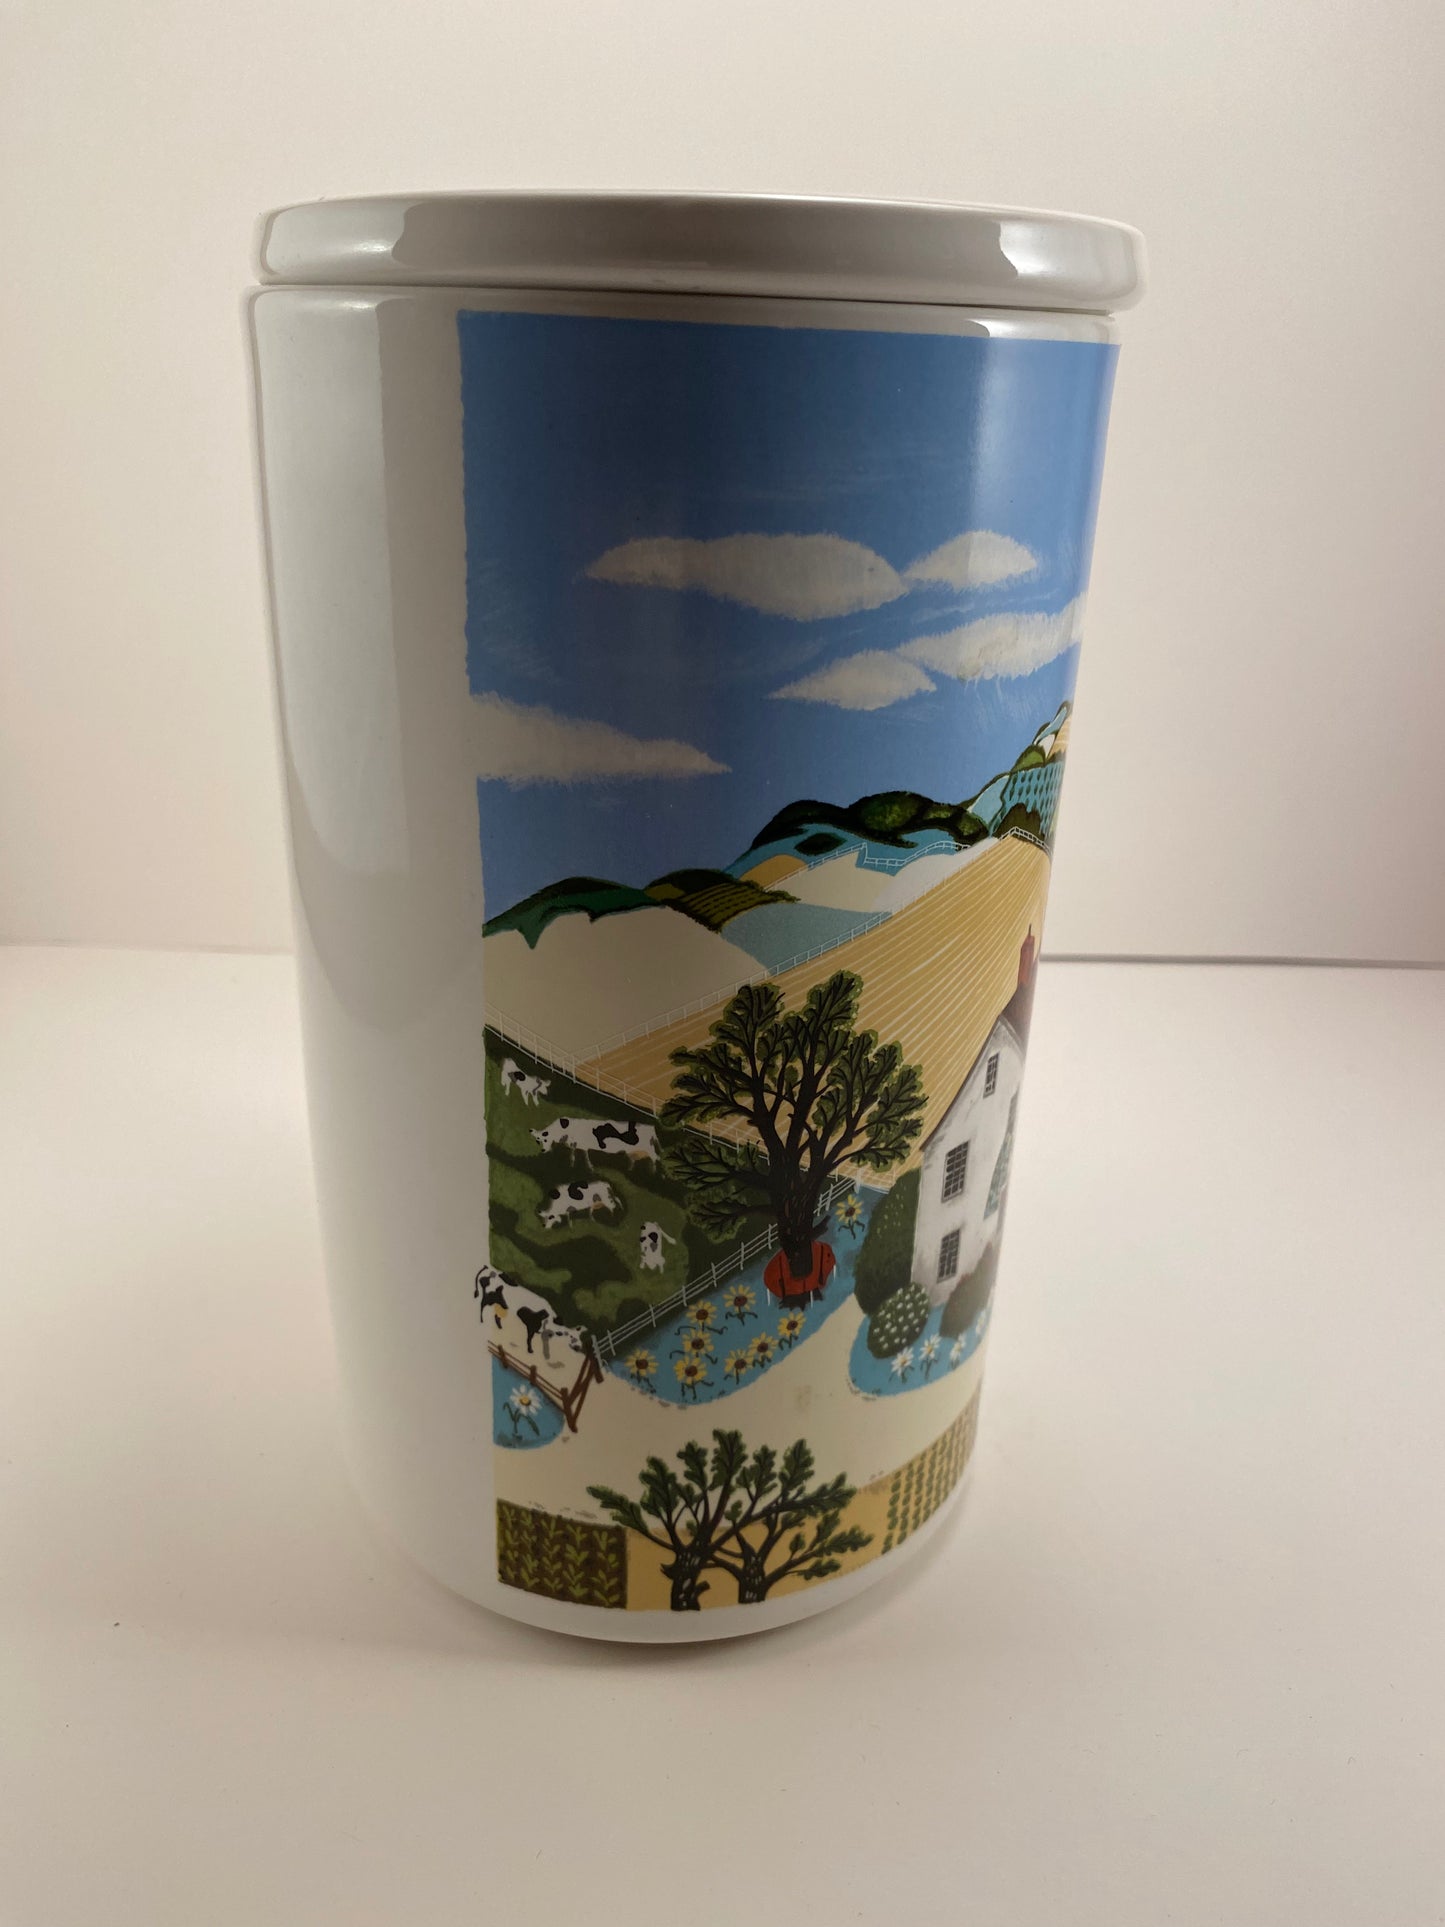 1985 Pfaltzgraff for Avon Country Canister-Large